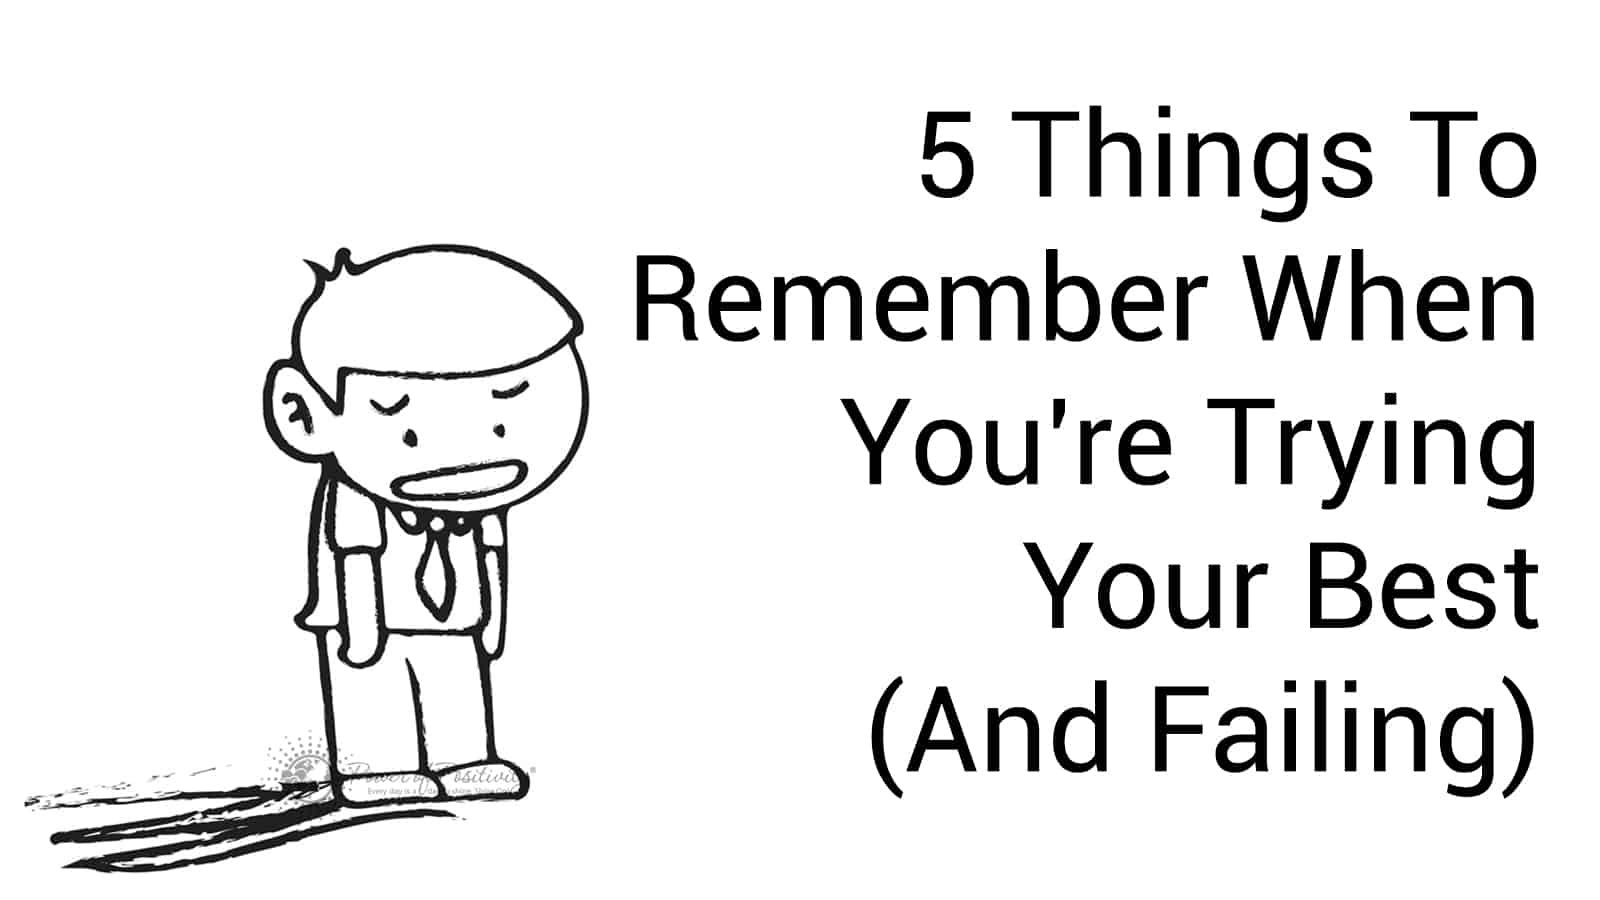 Things To Remember When You're Trying Your Best (And Failing)